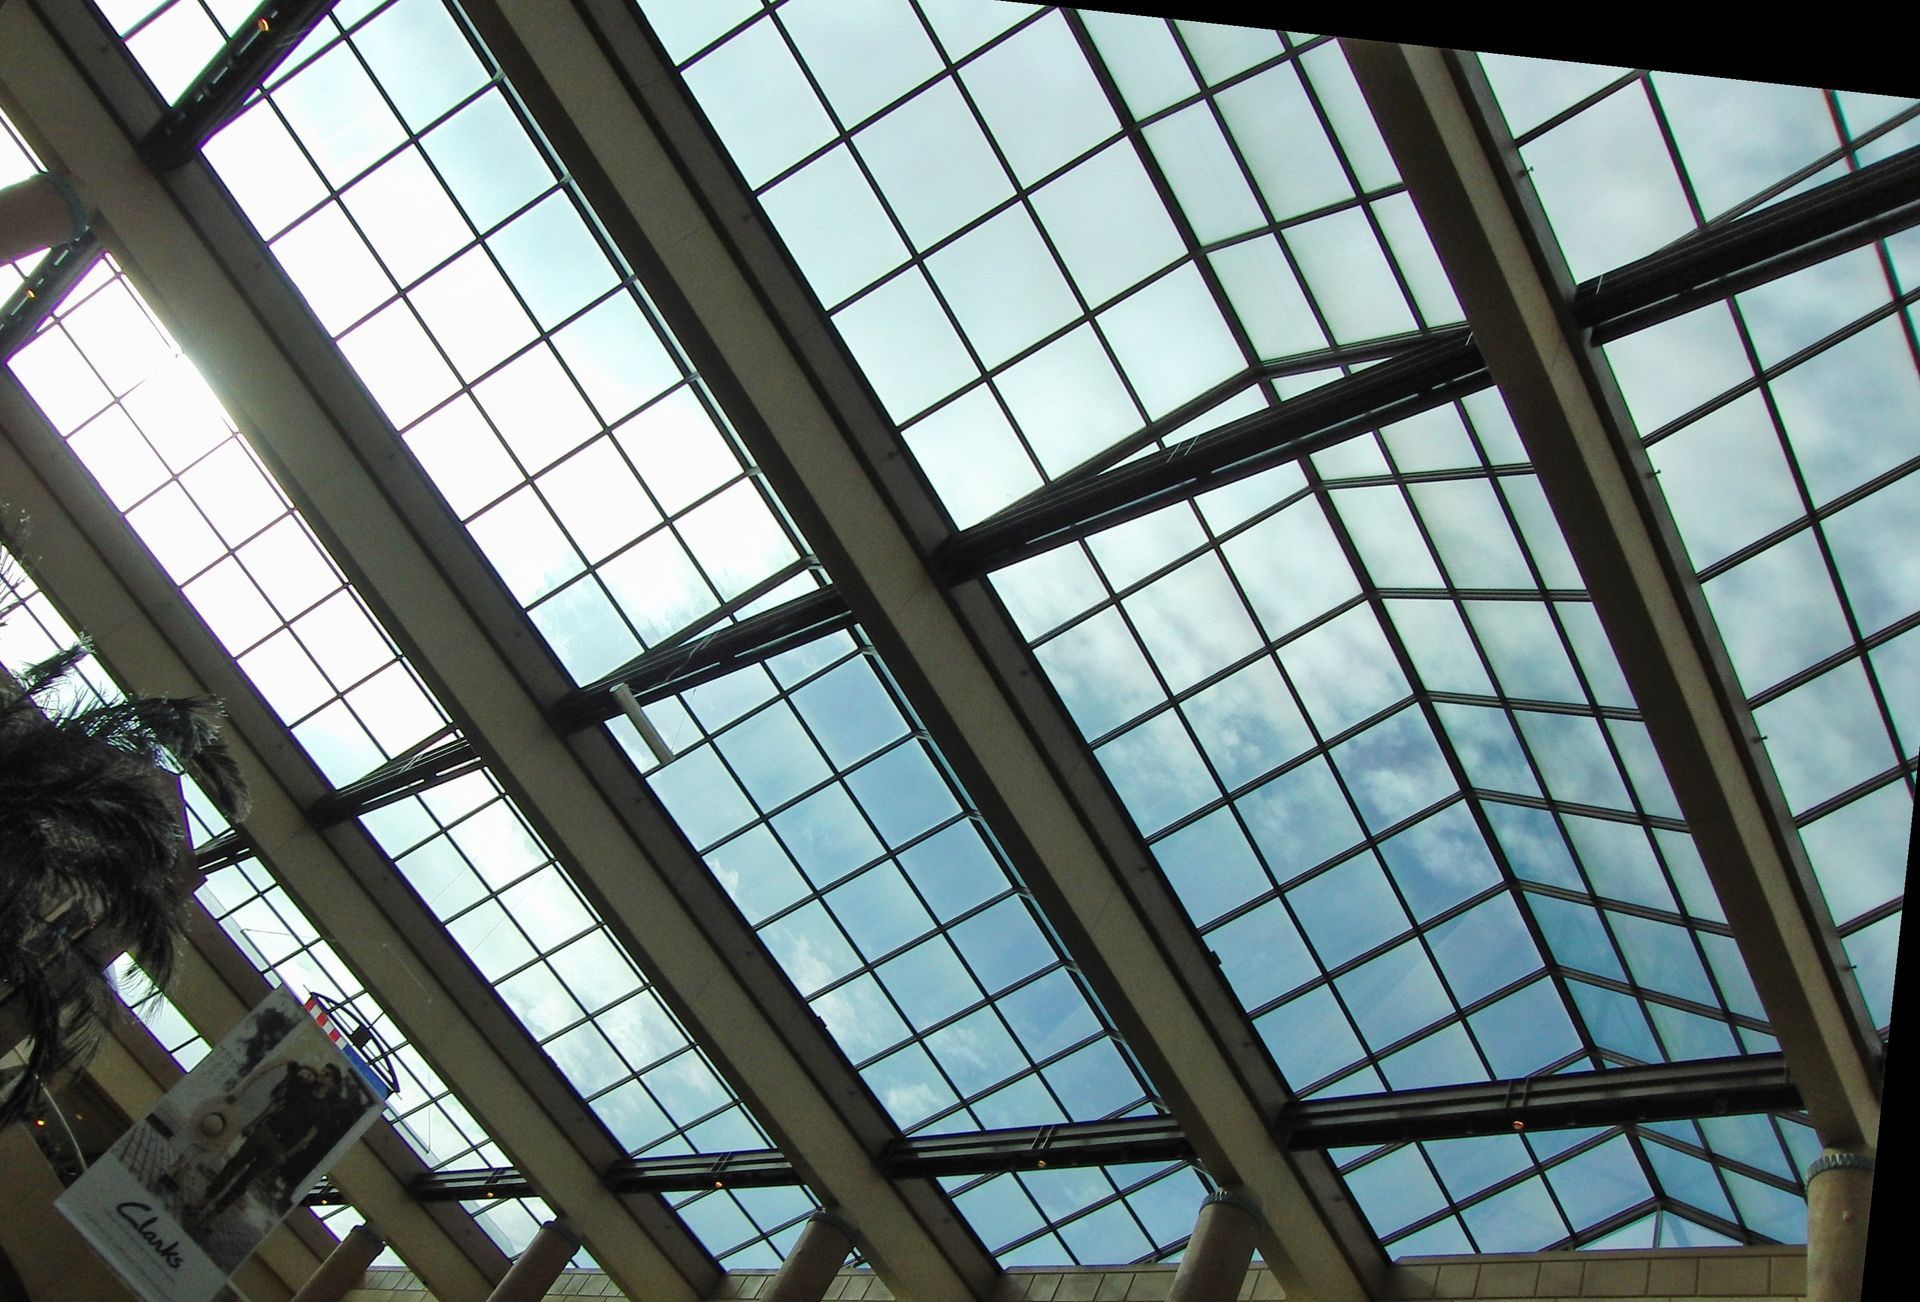 A commercial building with glass skylights and windows for the roof.